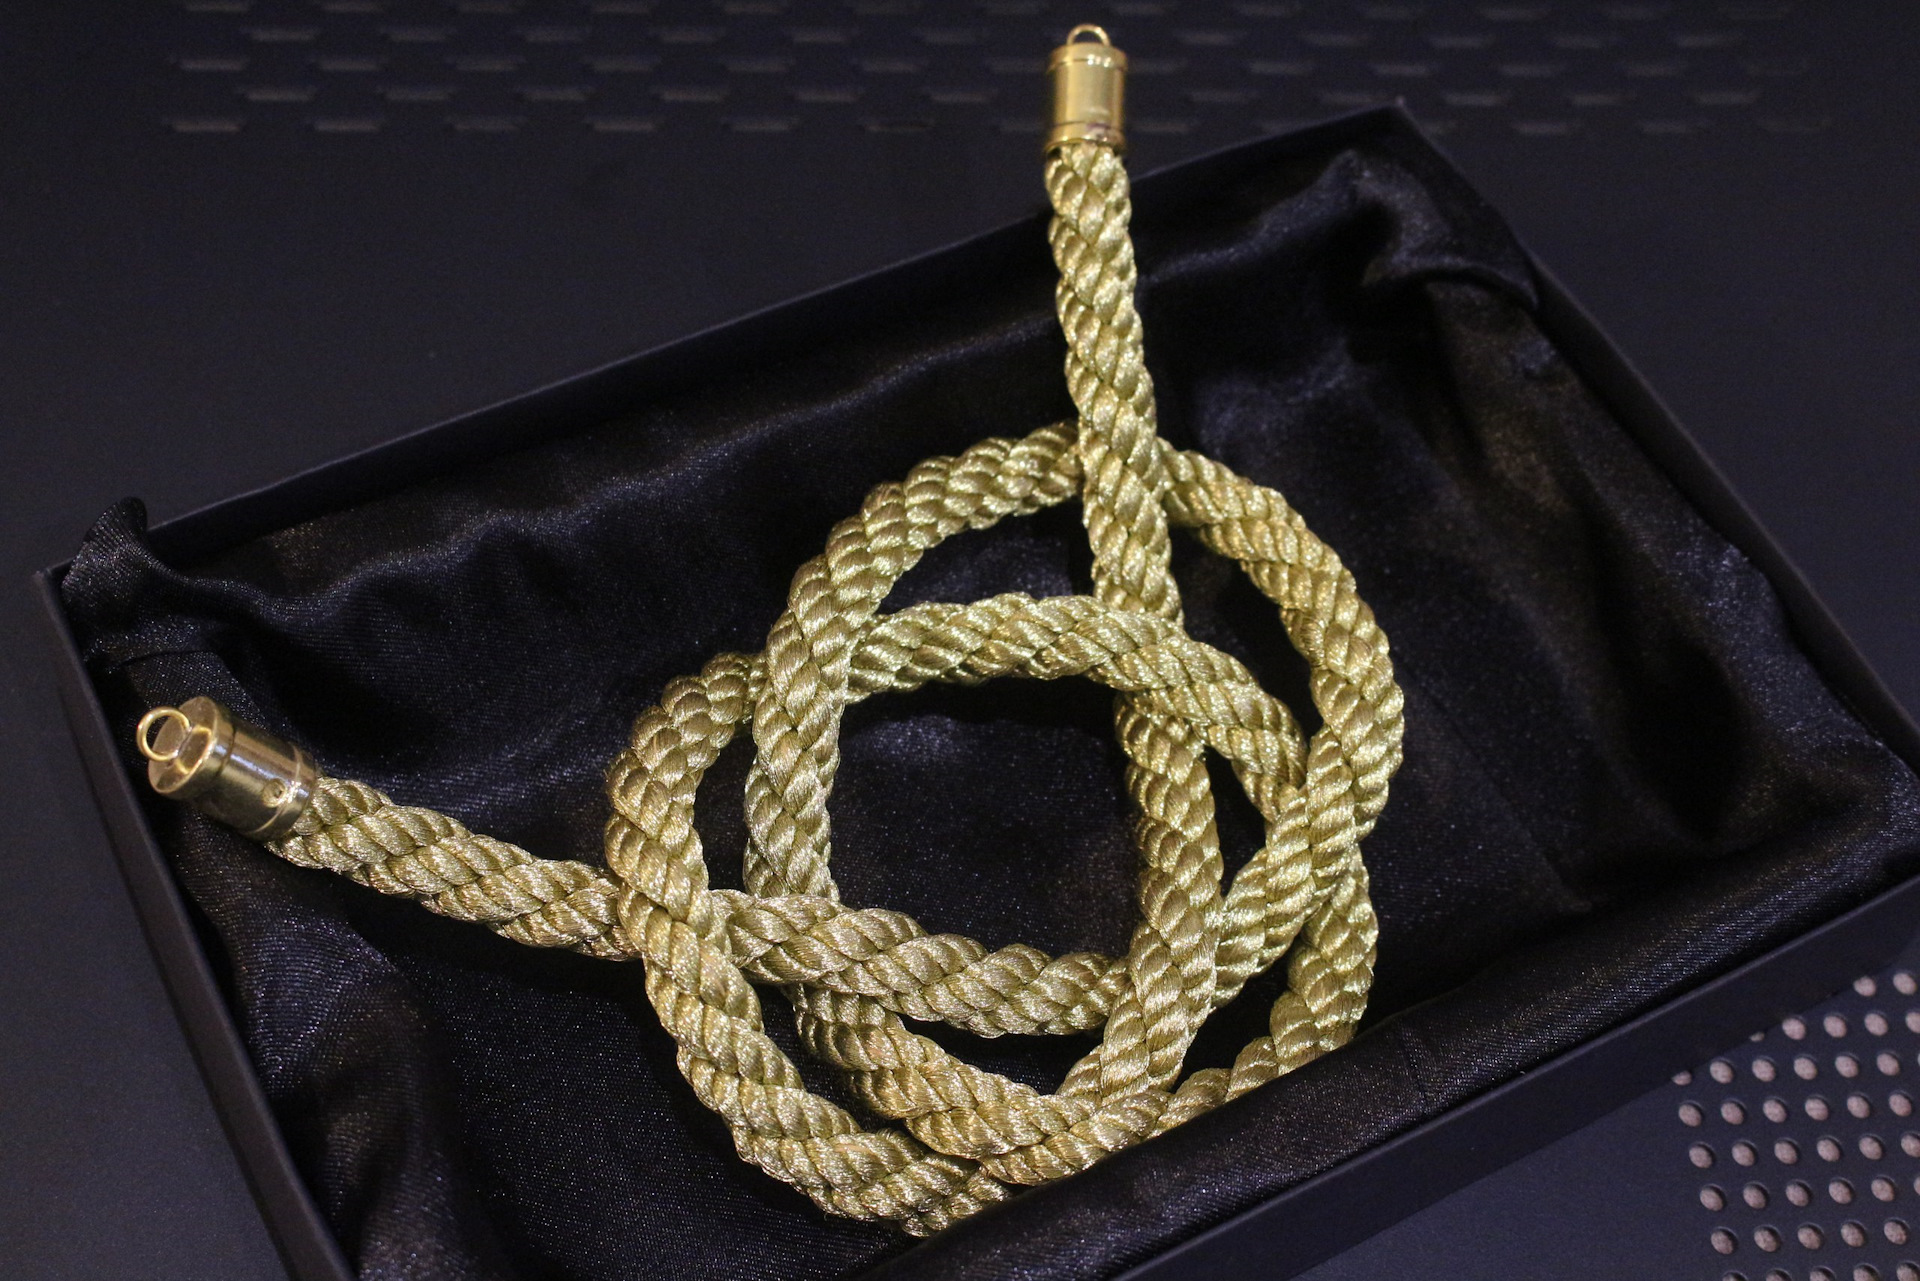 Gold rope